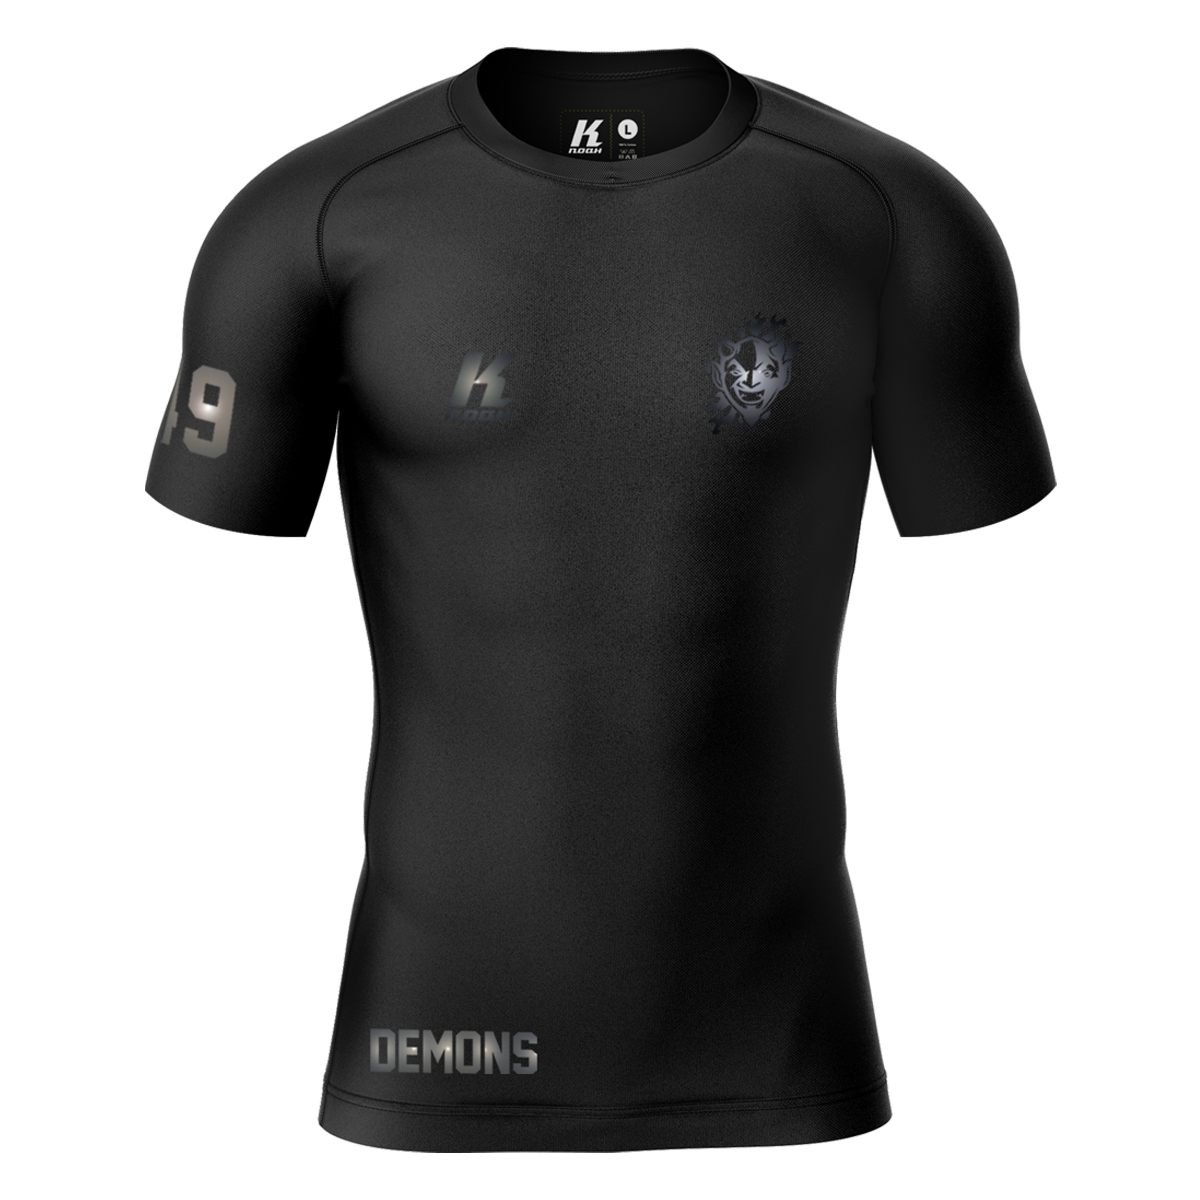 Demons "Blackline" K.Tech Compression Shortsleeve Shirt with Playernumber/Initials